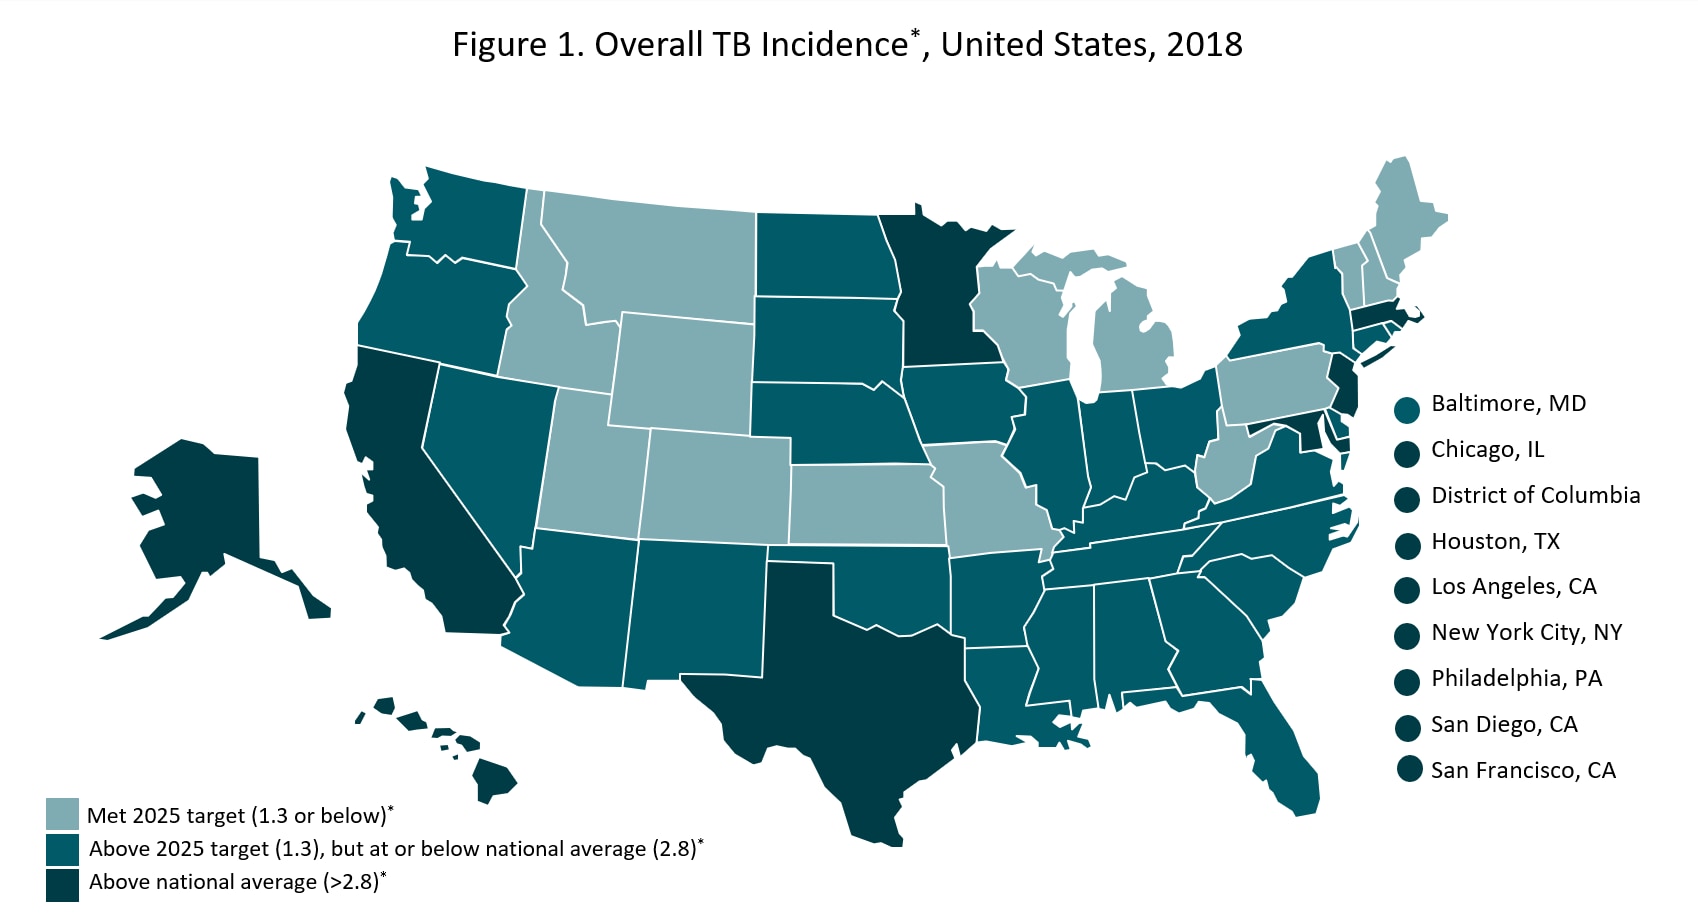 The 2018 State & City Report provides key process and outcome measures for TB control programs for 50 states and 9 cities.